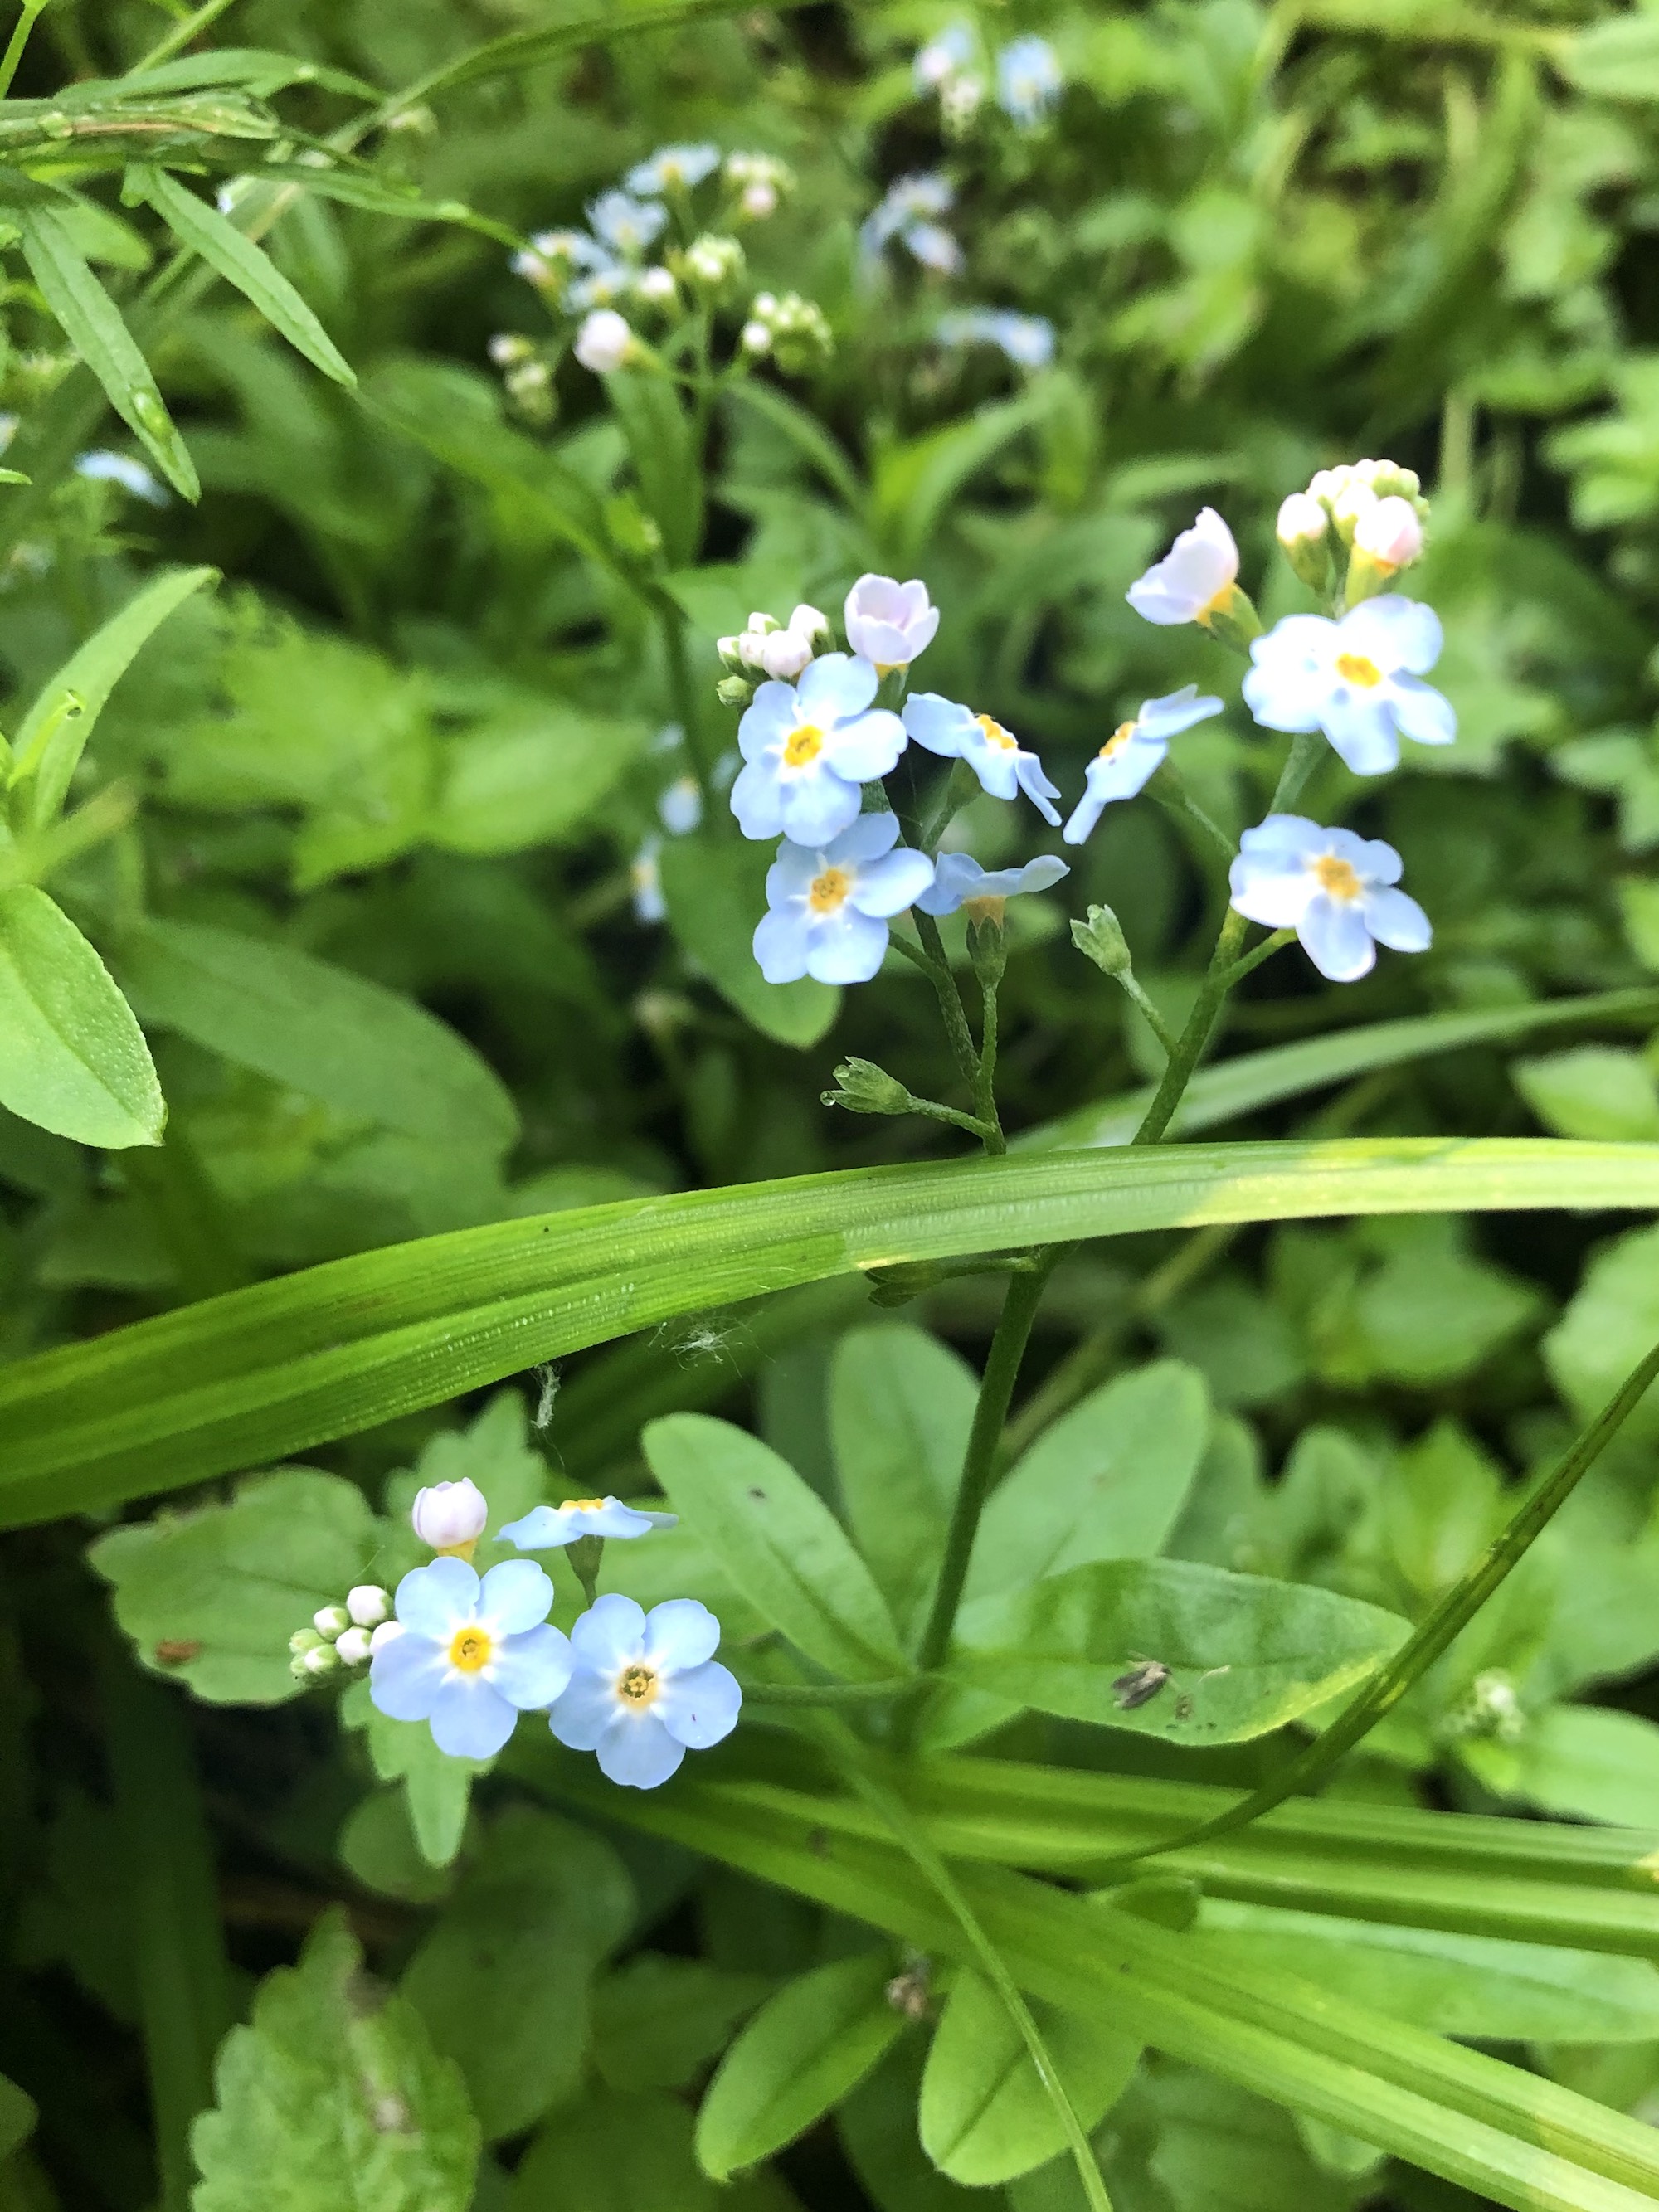 True Forget-me-not near cattails at Pickford Street stormwater outflow into Lake Wingra in Madison, Wisconsin on June 17, 2020.